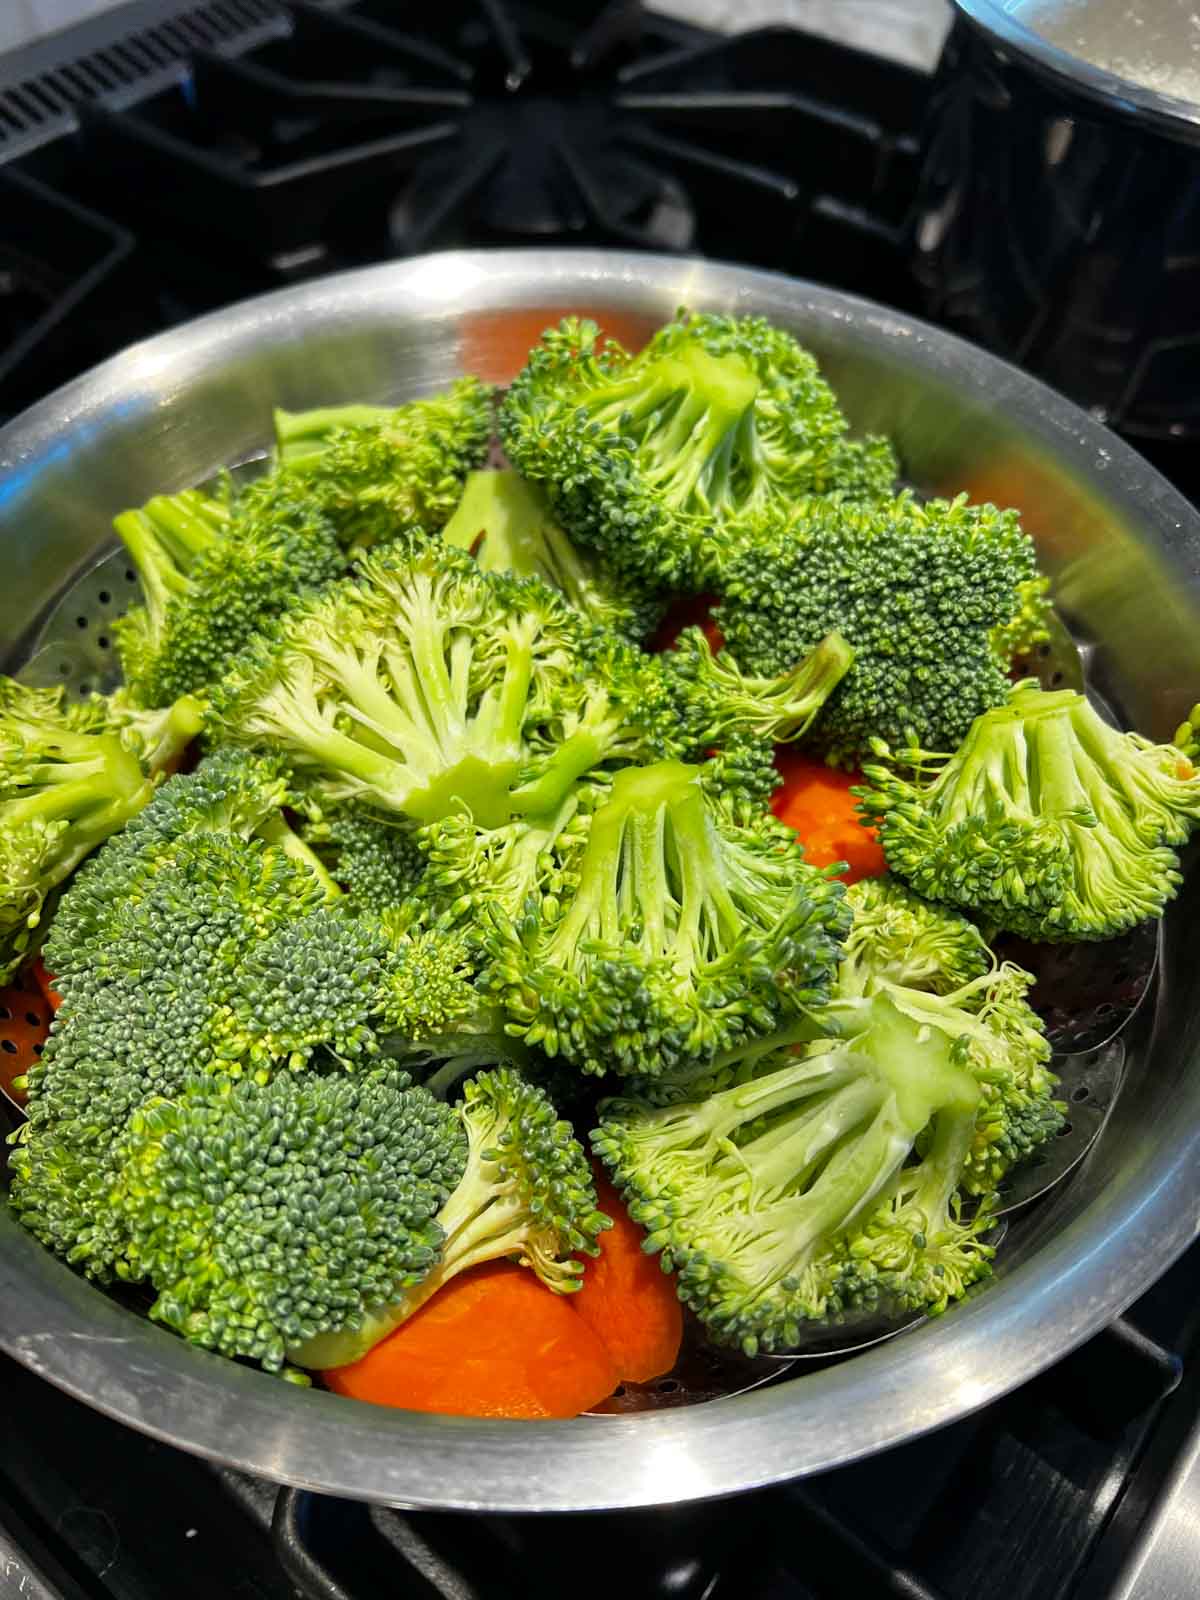 raw broccoli and carrots in a steamer basket on the stove top